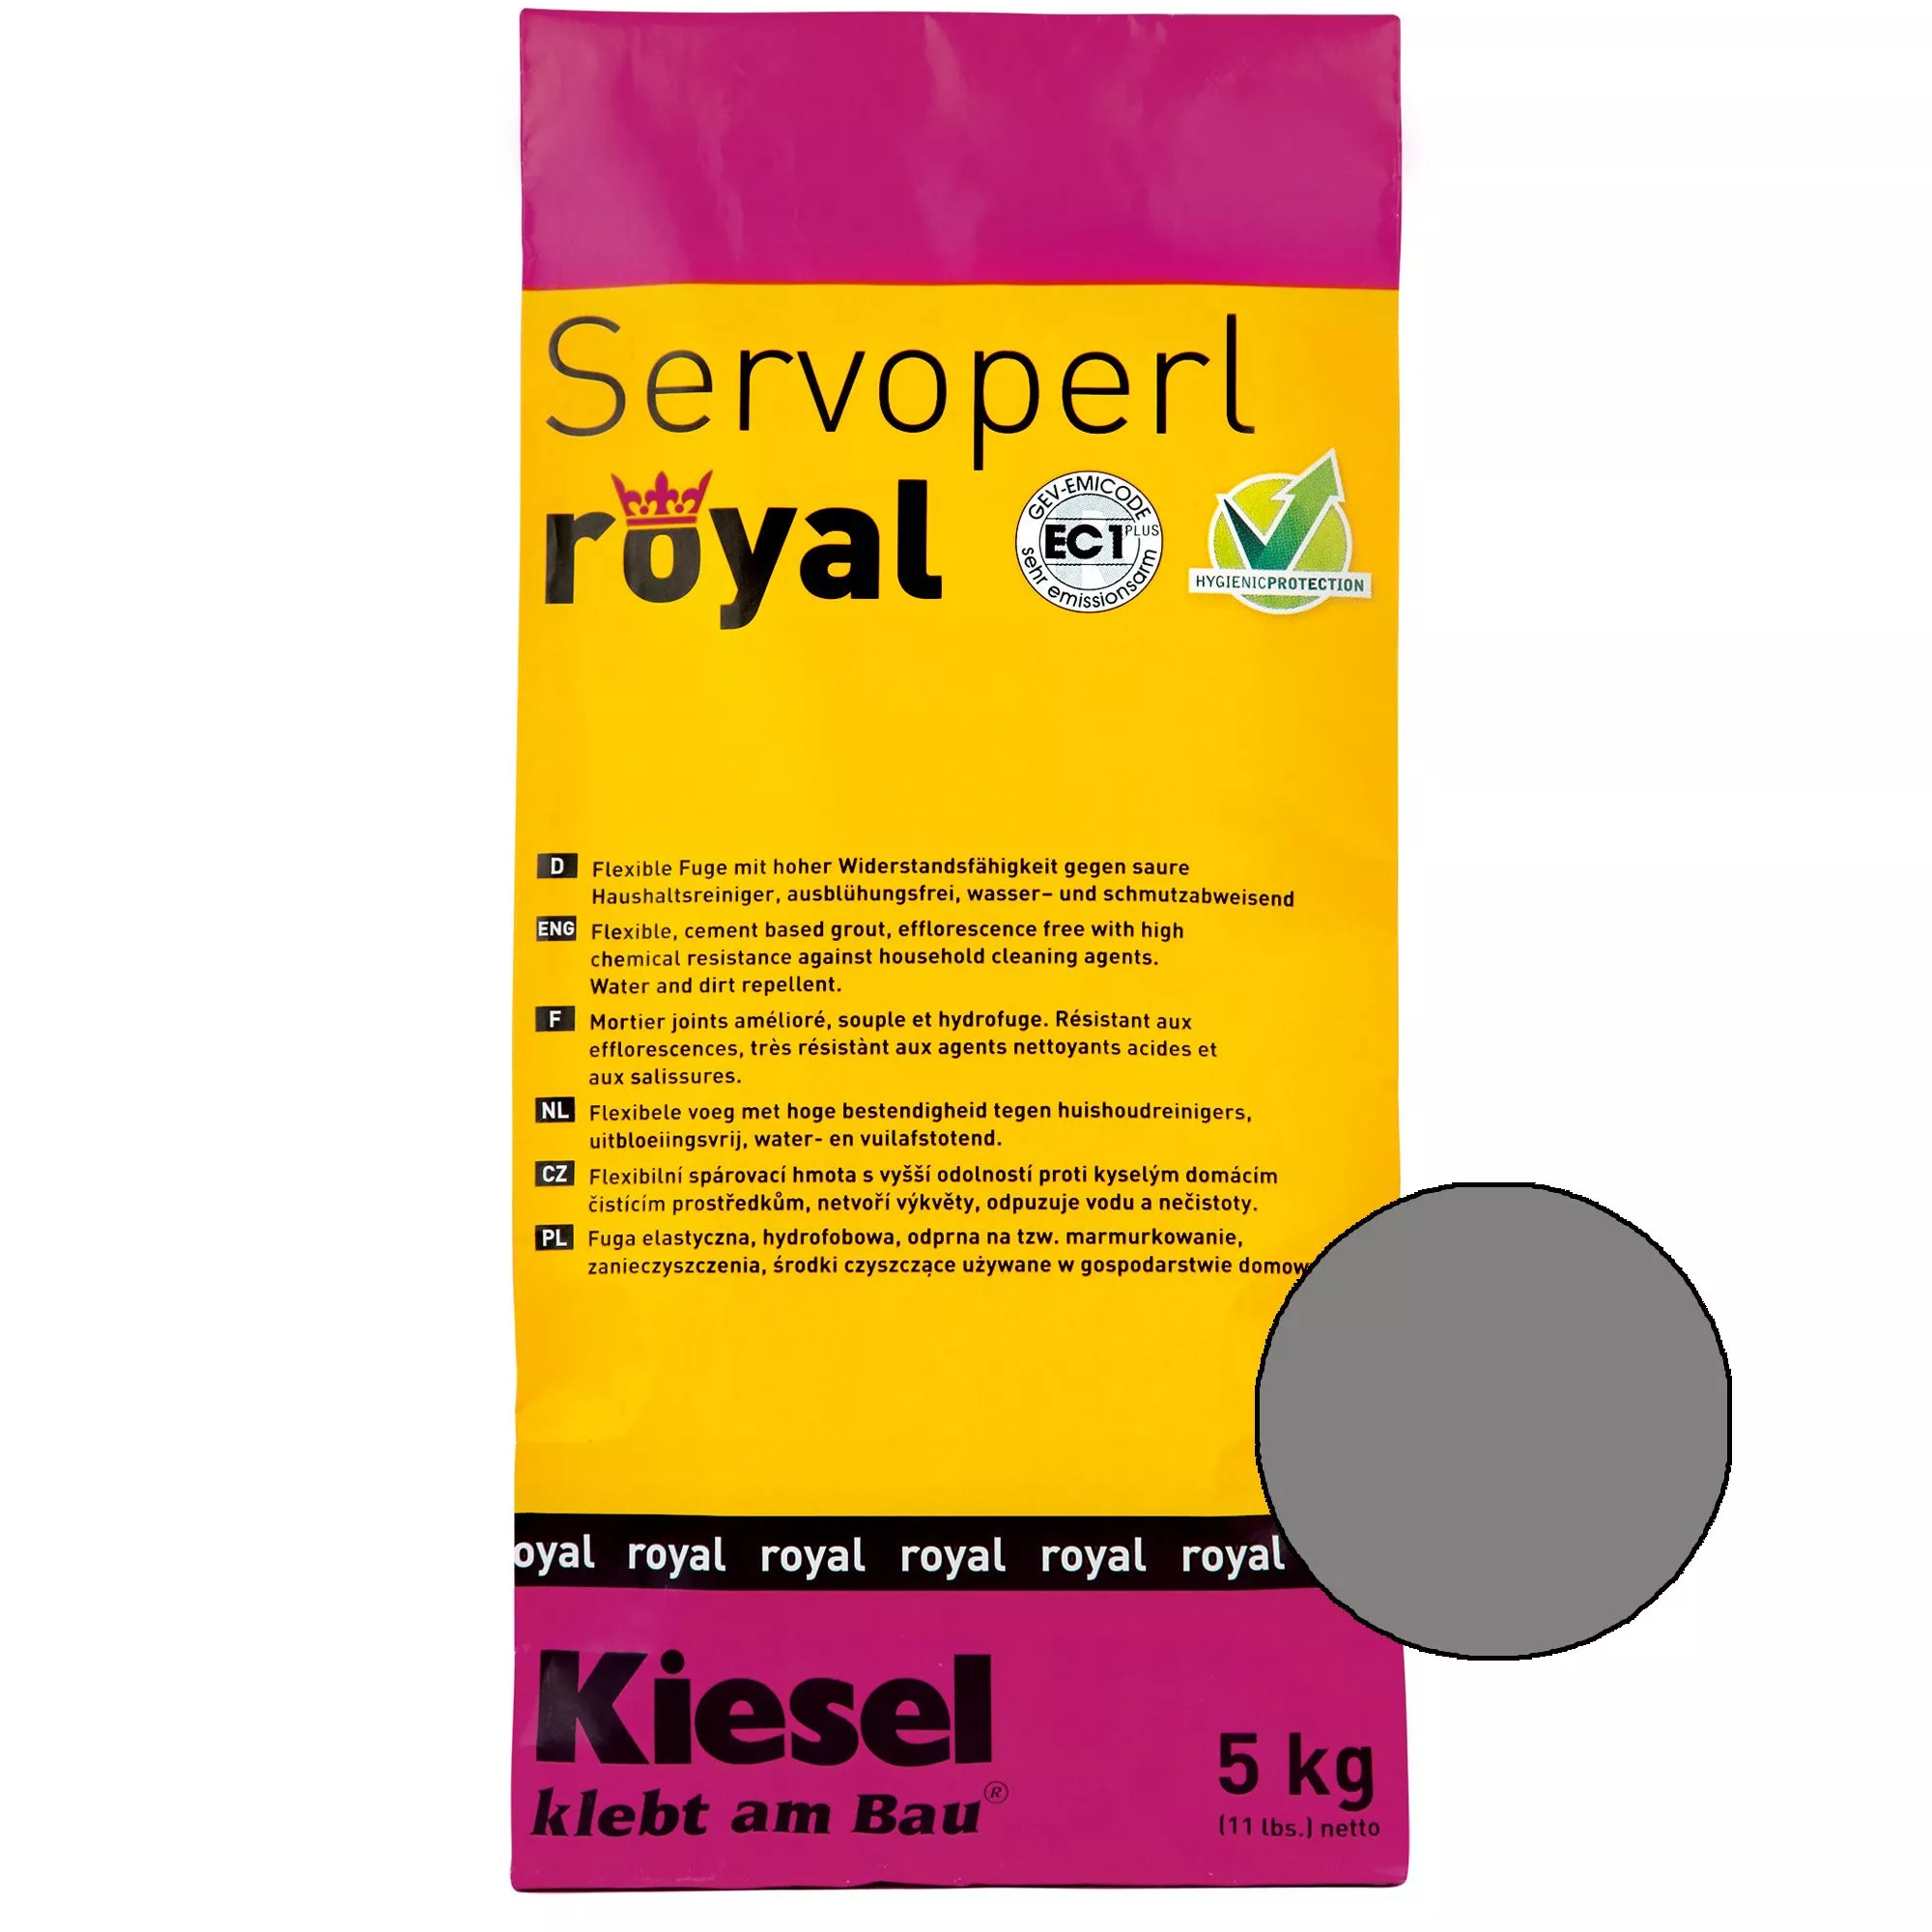 Kiesel Servoperl royal - flexible, water- and dirt-repellent joint (5KG middle grey)